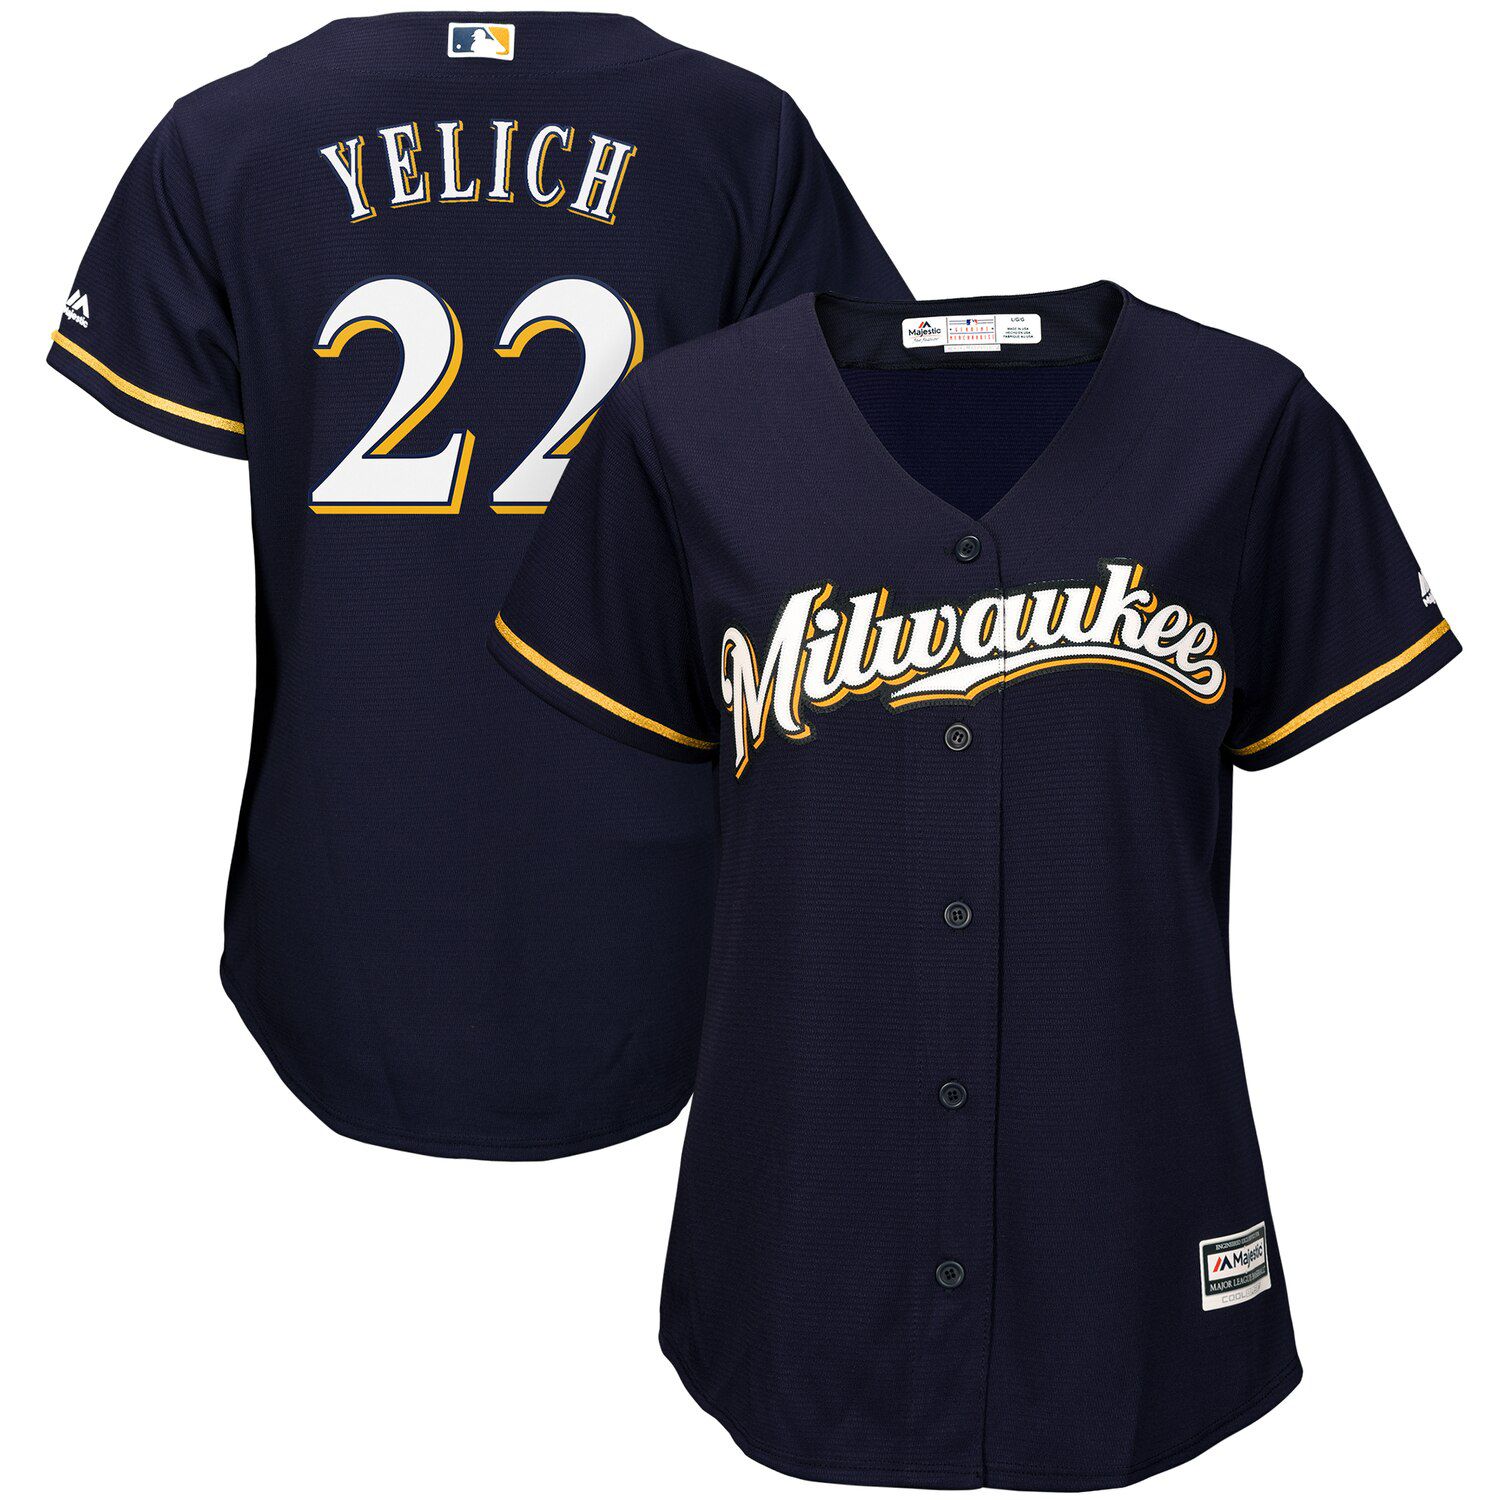 womens brewers jersey